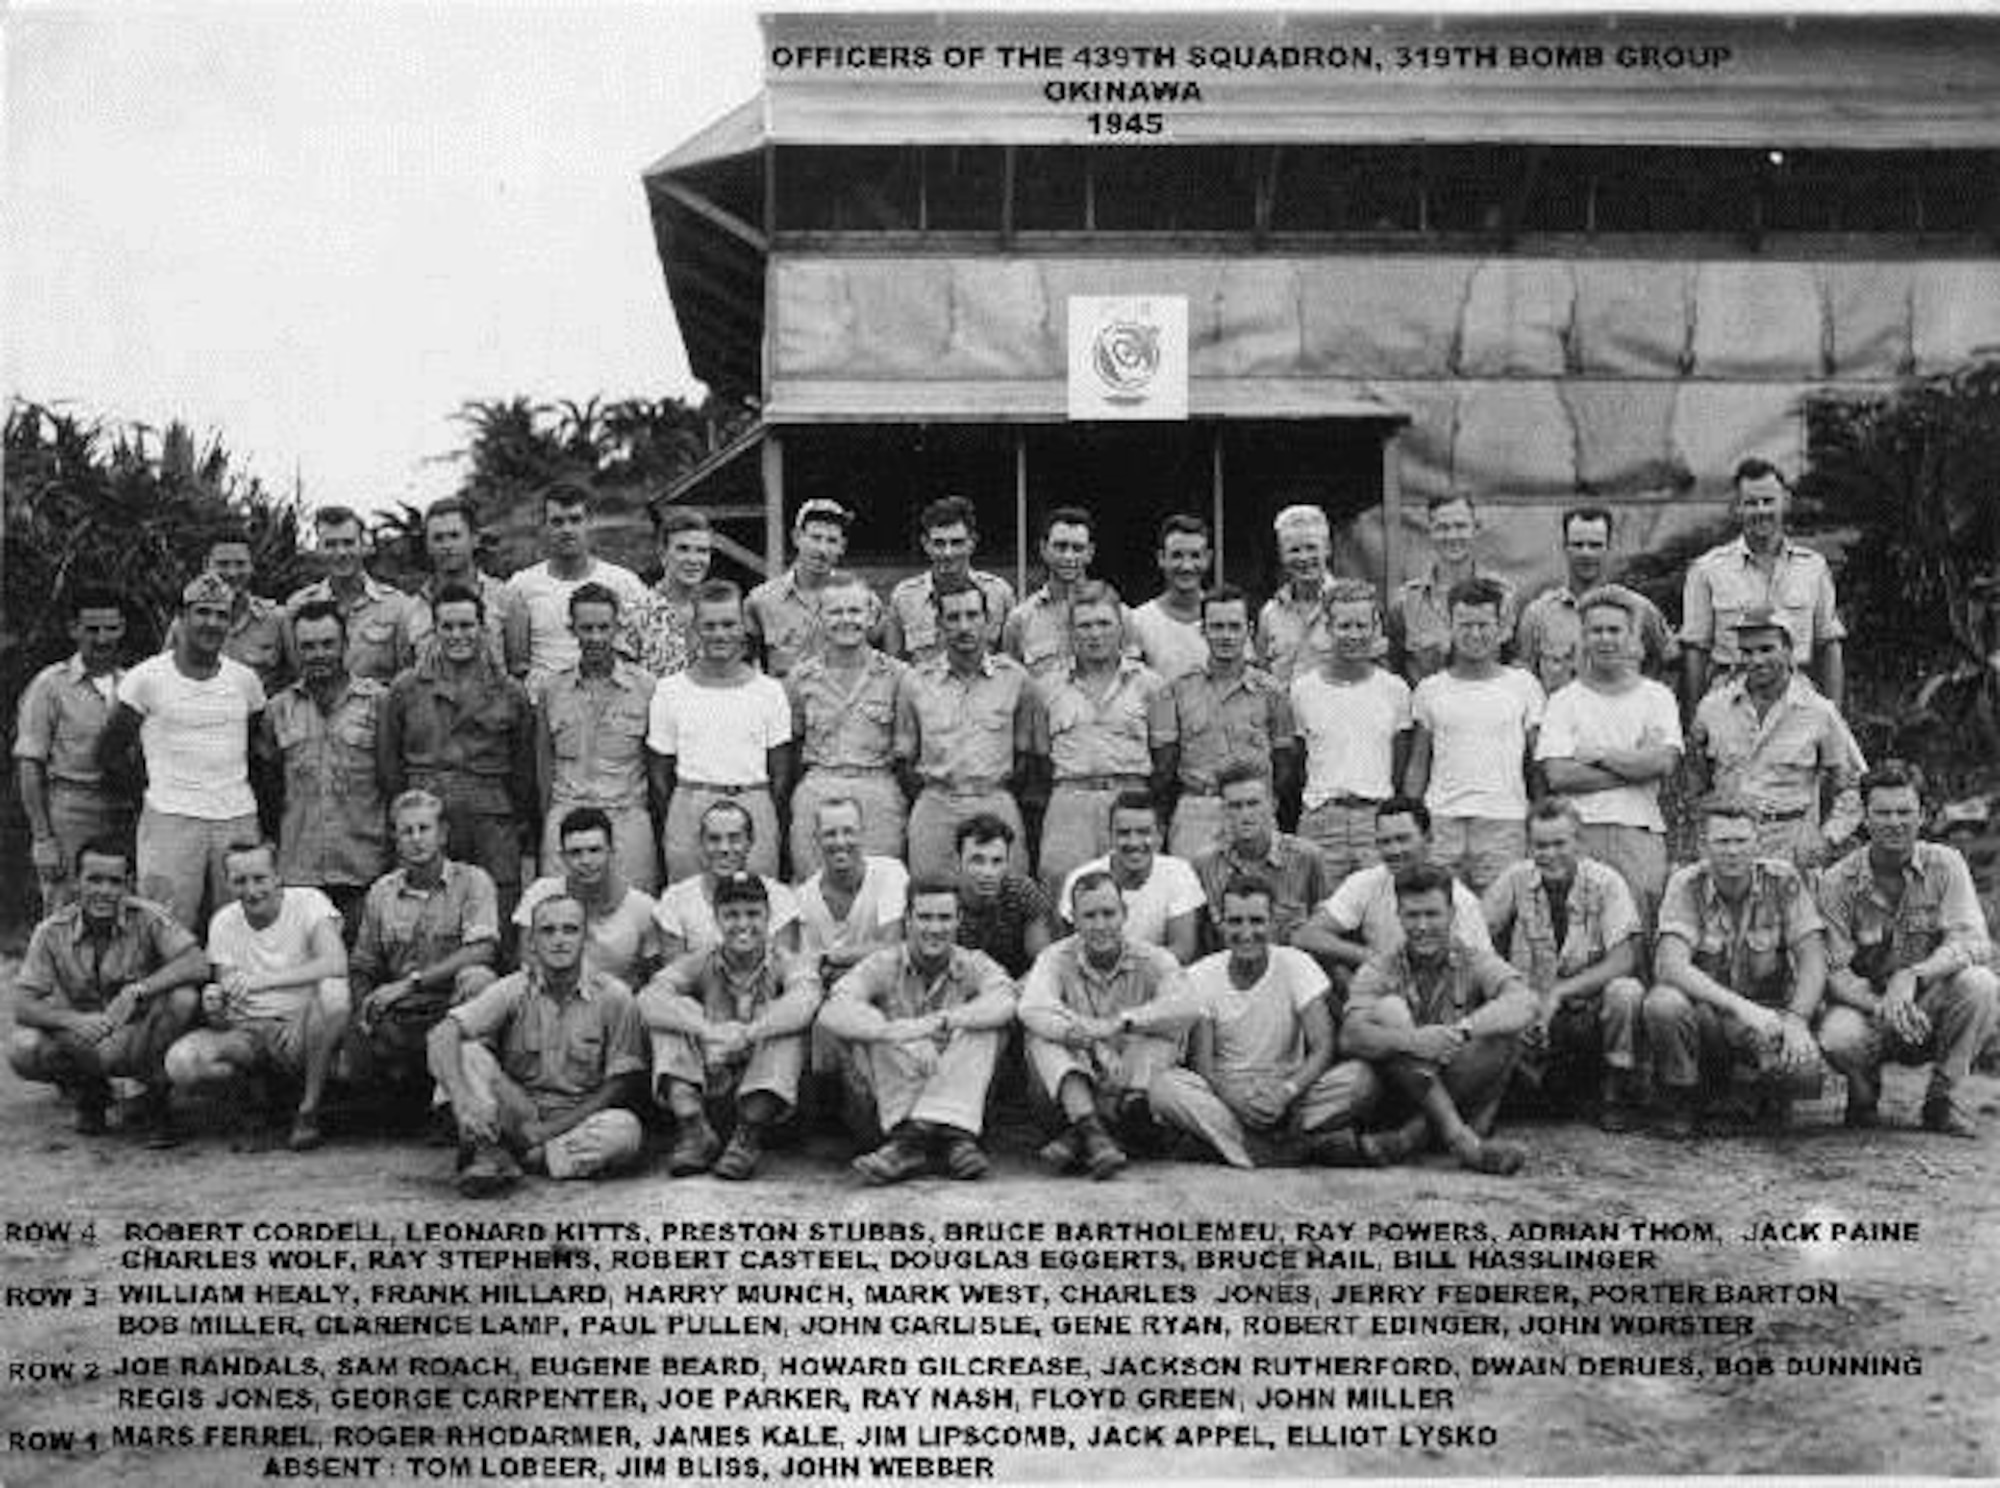 Officers of the 439th Bomb Squadron gather for a picture in front of their mess on Okinawa, late in World War II.  They were part of the 319th Bomb Group which transferred from the war in Europe to help finish the war in the Pacific.  Today the unit is the 114th Fighter Squadron of the Oregon Air National Guard, at Kingsley Field, Oregon. (Courtesy 319th Bomb Group Association)